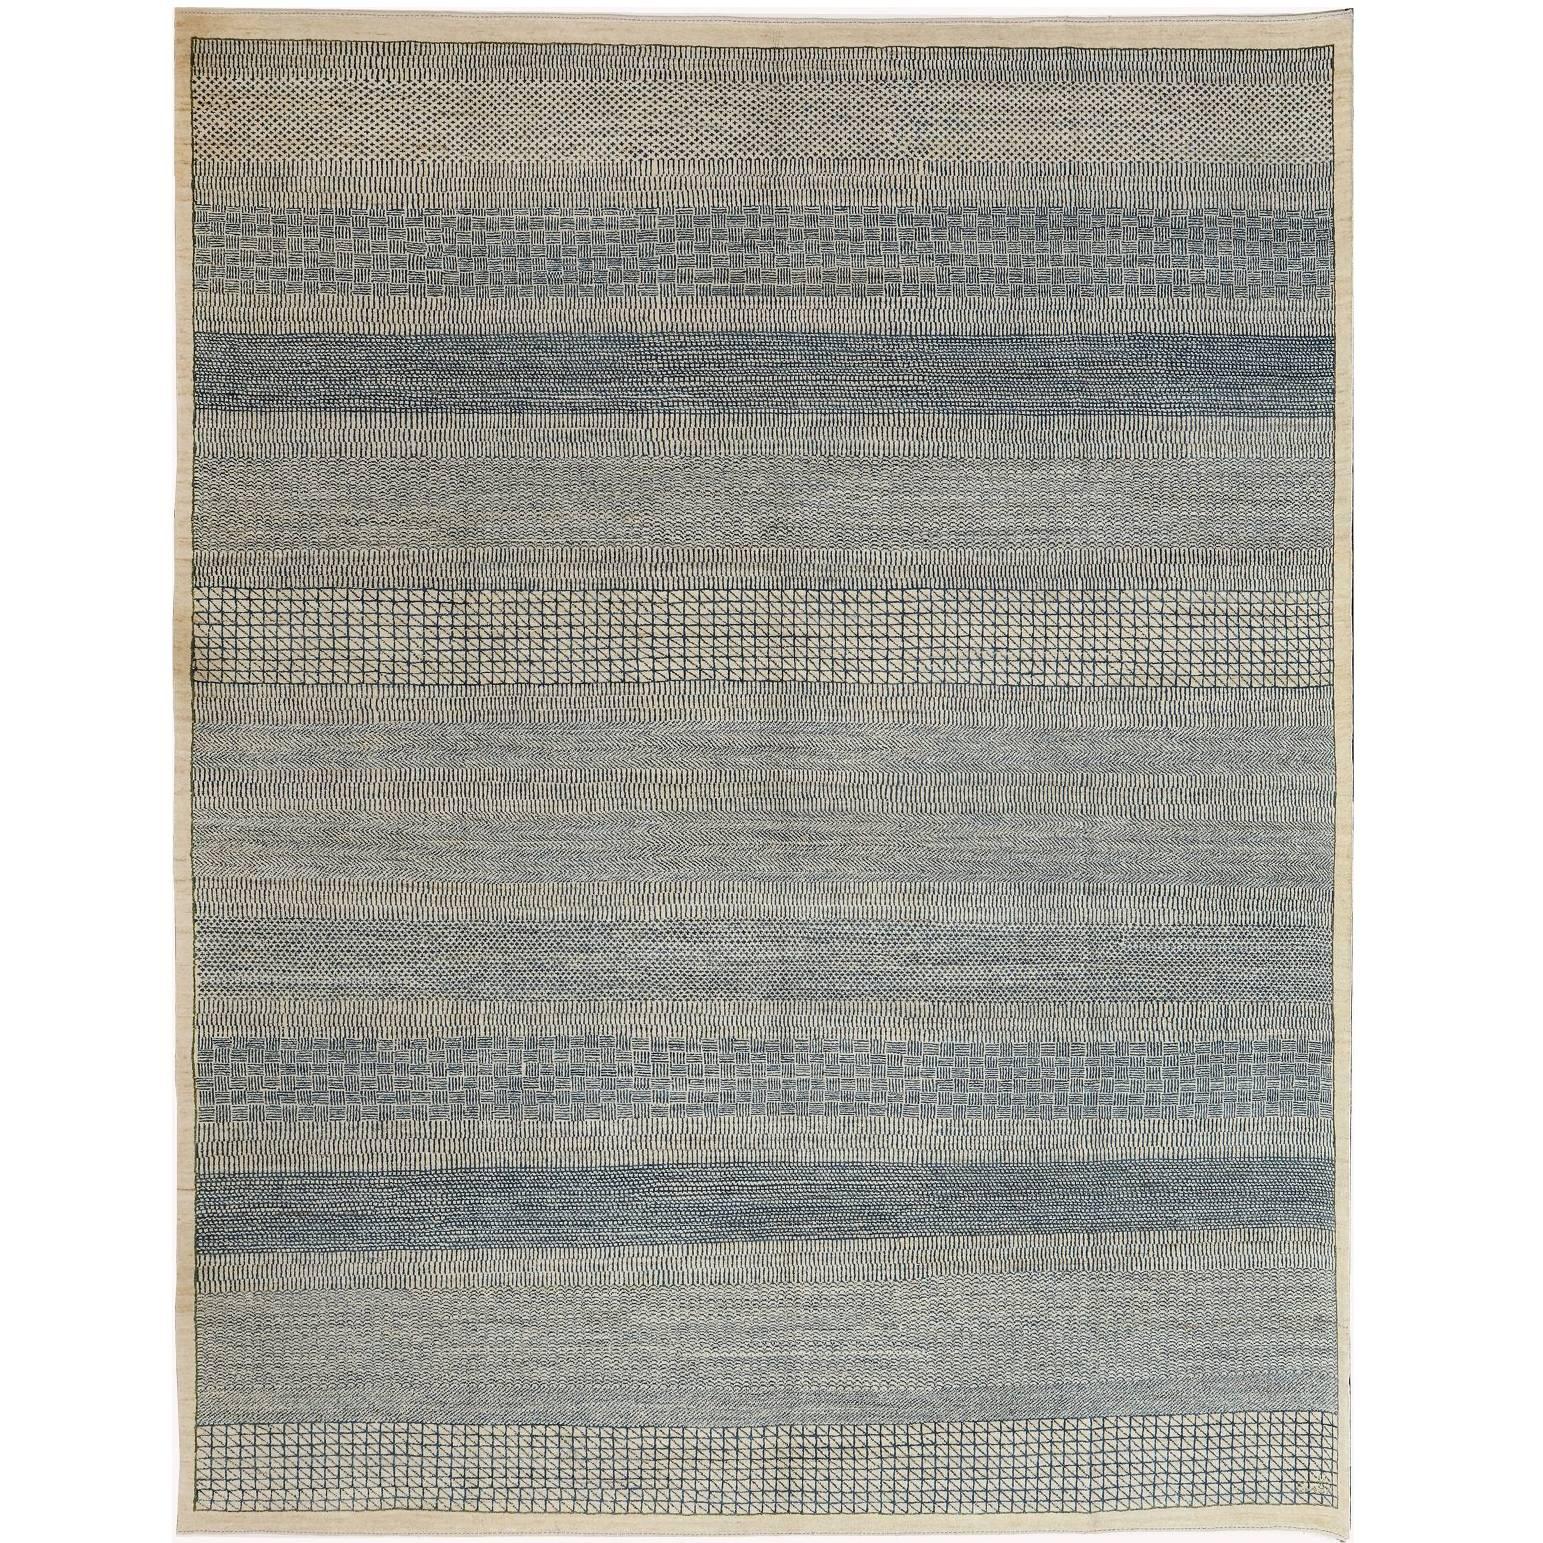 Orley Shabahang "Rain" Contemporary Persian Rug, Blue and Cream, 8' x 10' For Sale